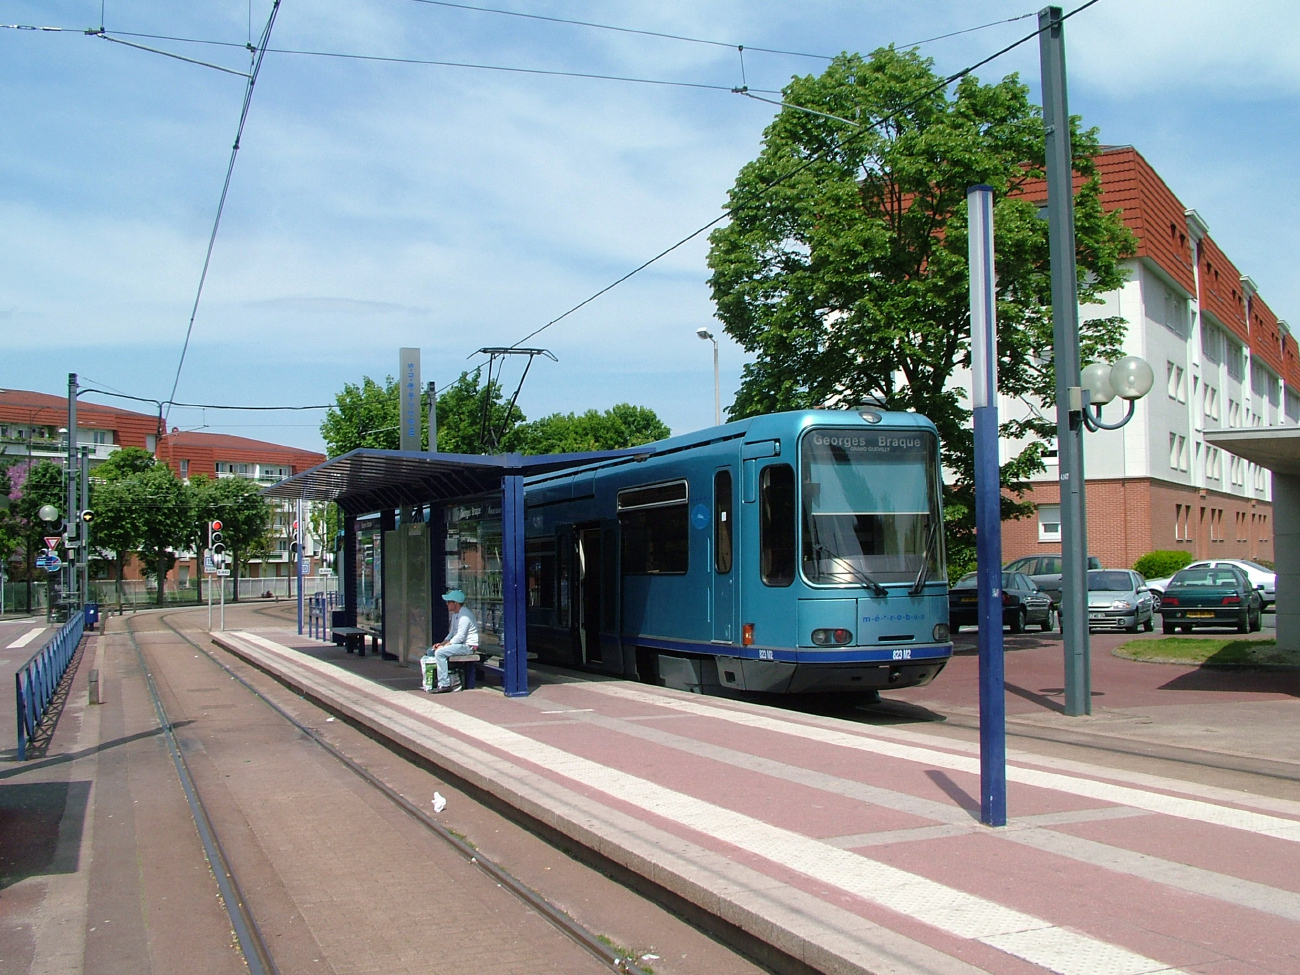 Rouen — Tramway Lines and Infrastructure